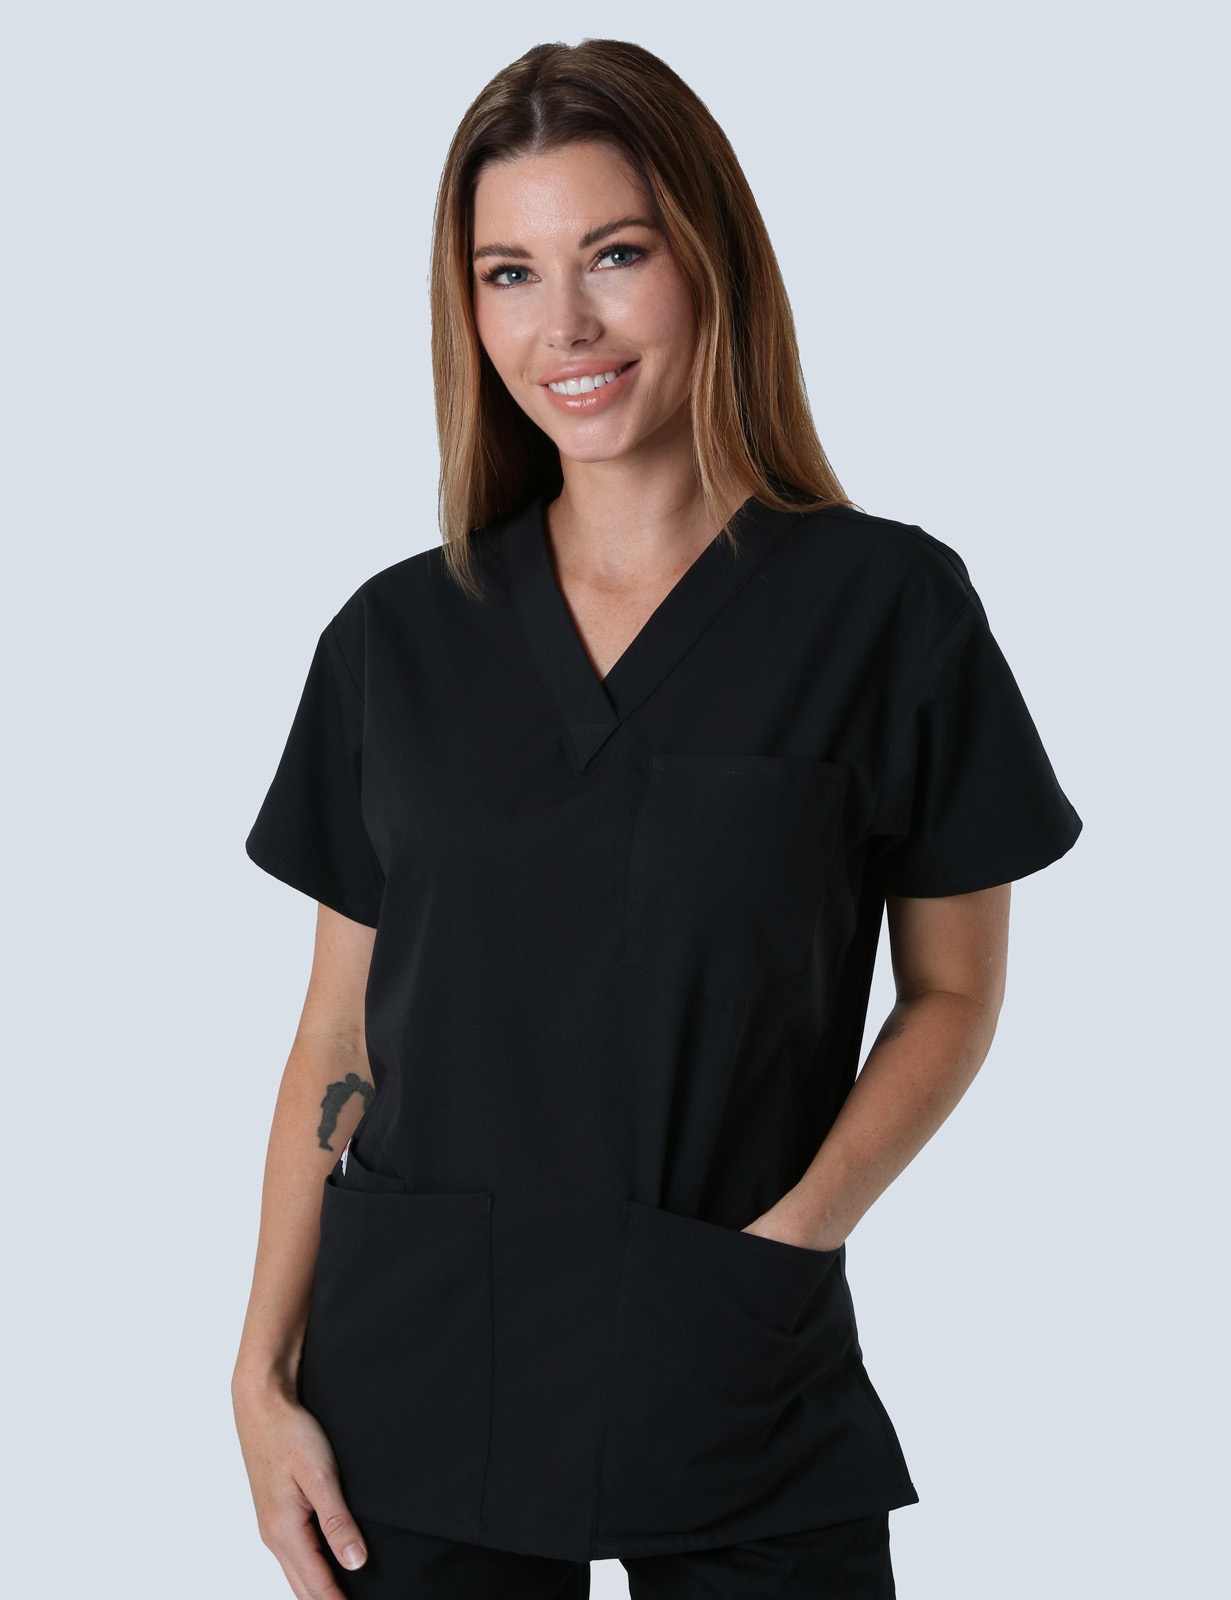 Northpark Private - ED CNS (4 Pocket Scrub Top and Cargo Pants in Black incl Logos)